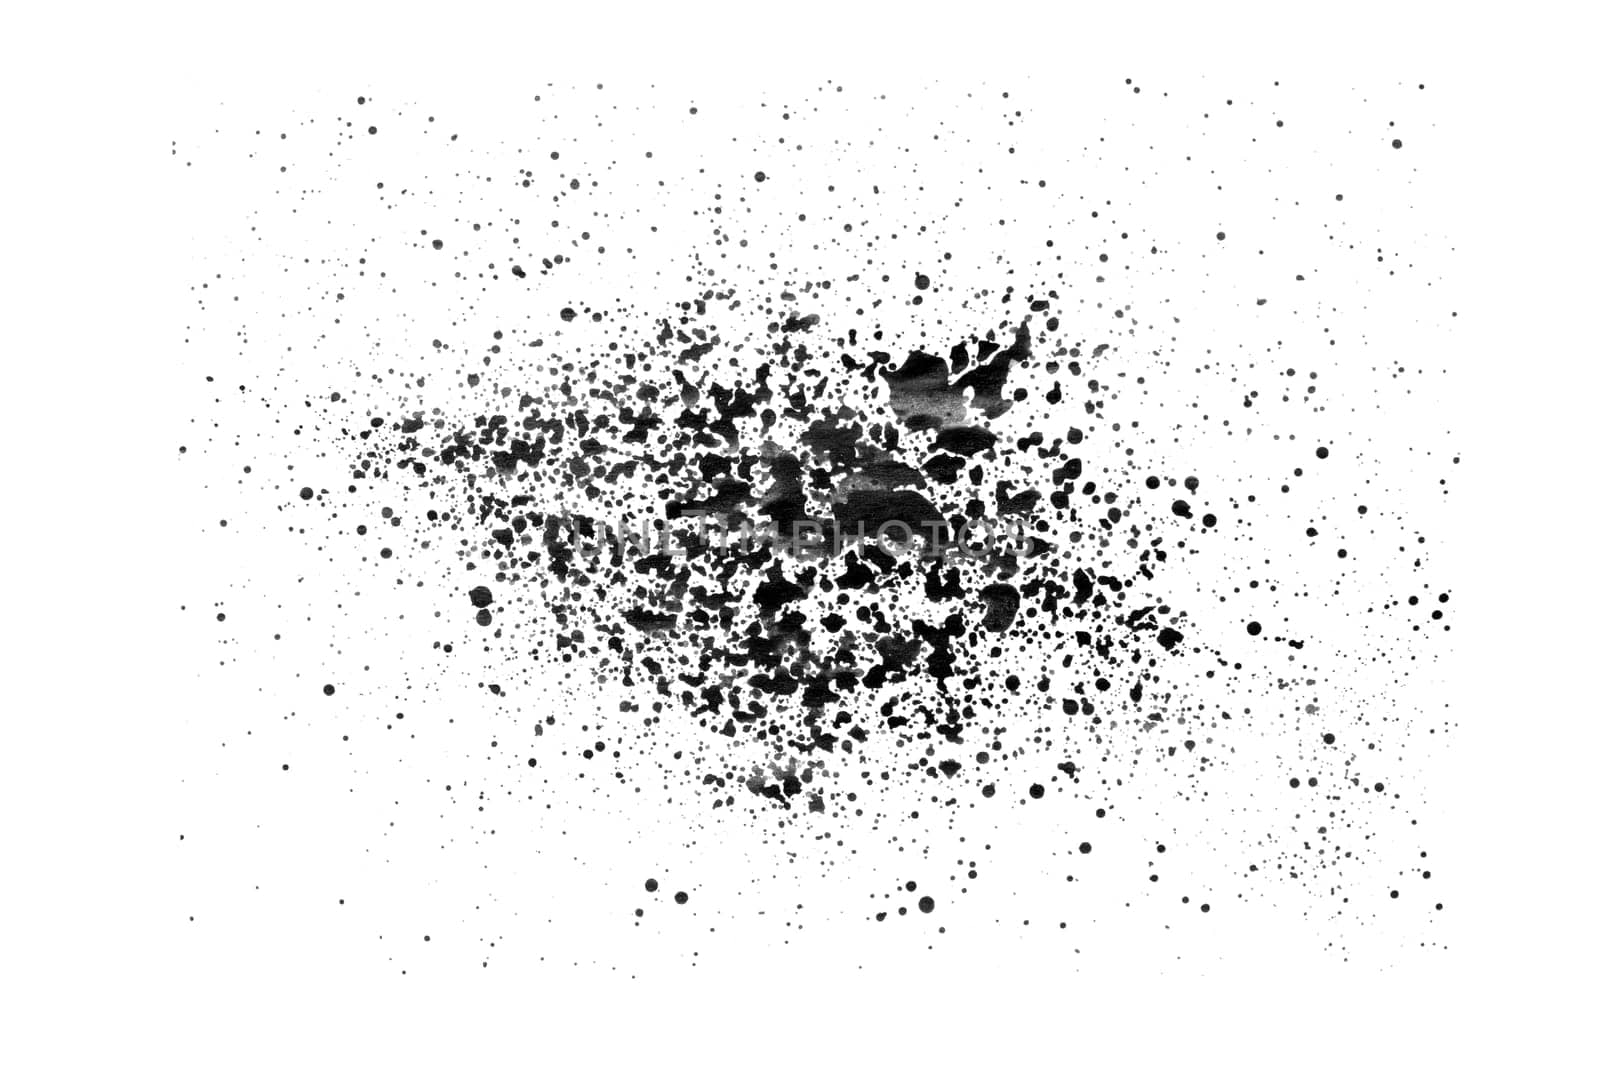 Splatter of black paint isolated on a white background. Stock photo.